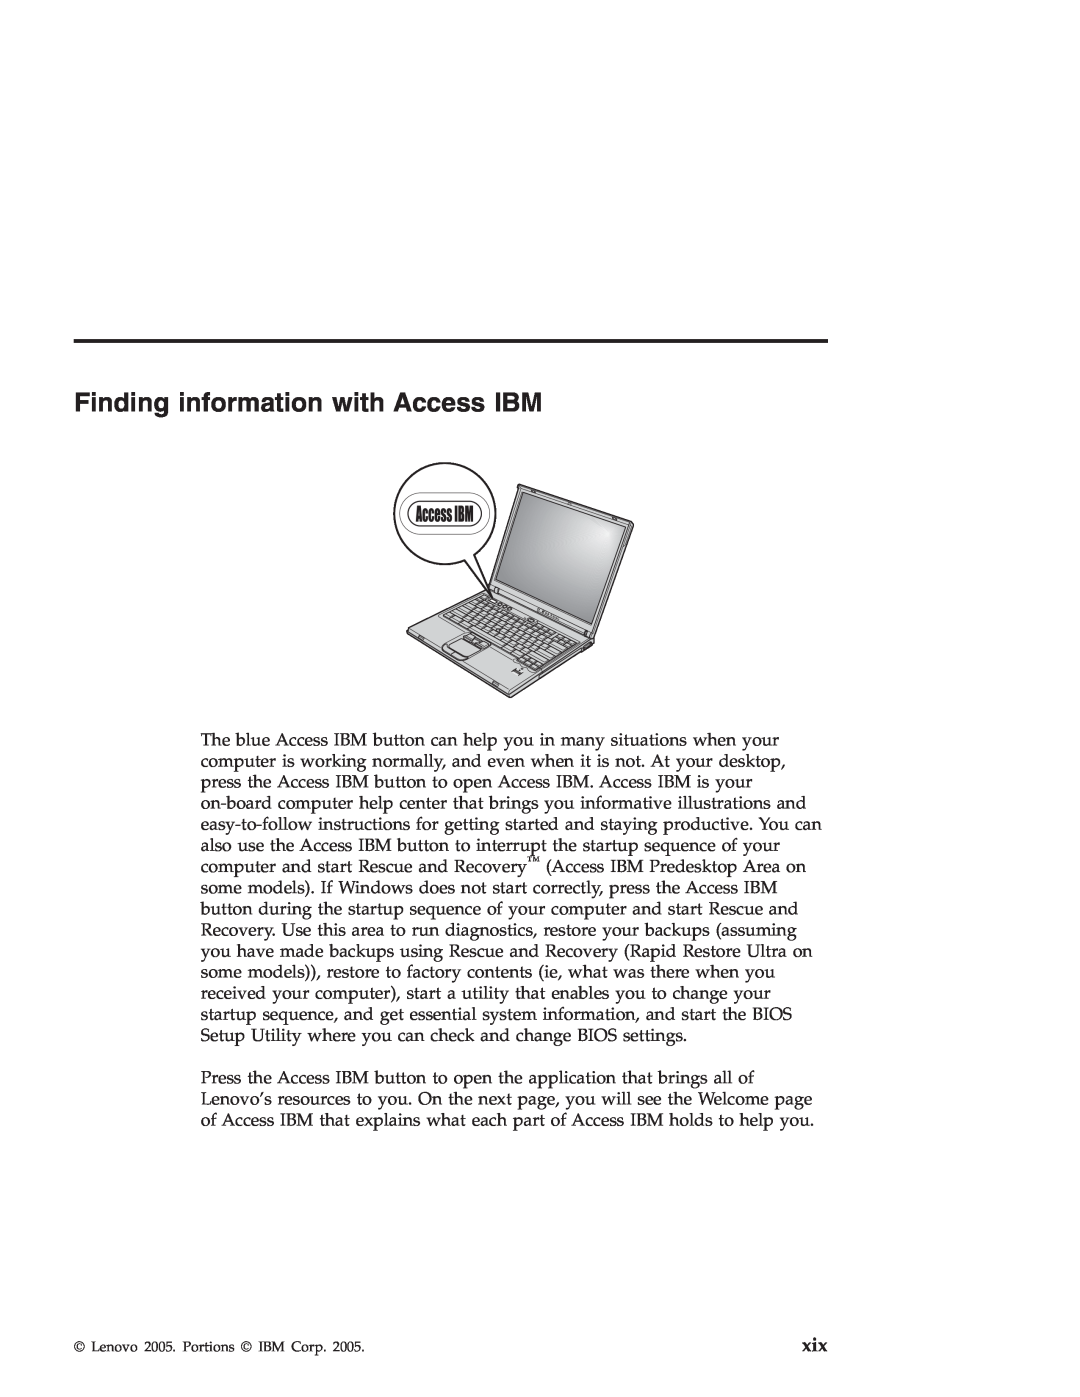 Lenovo R50 manual Finding information with Access IBM 